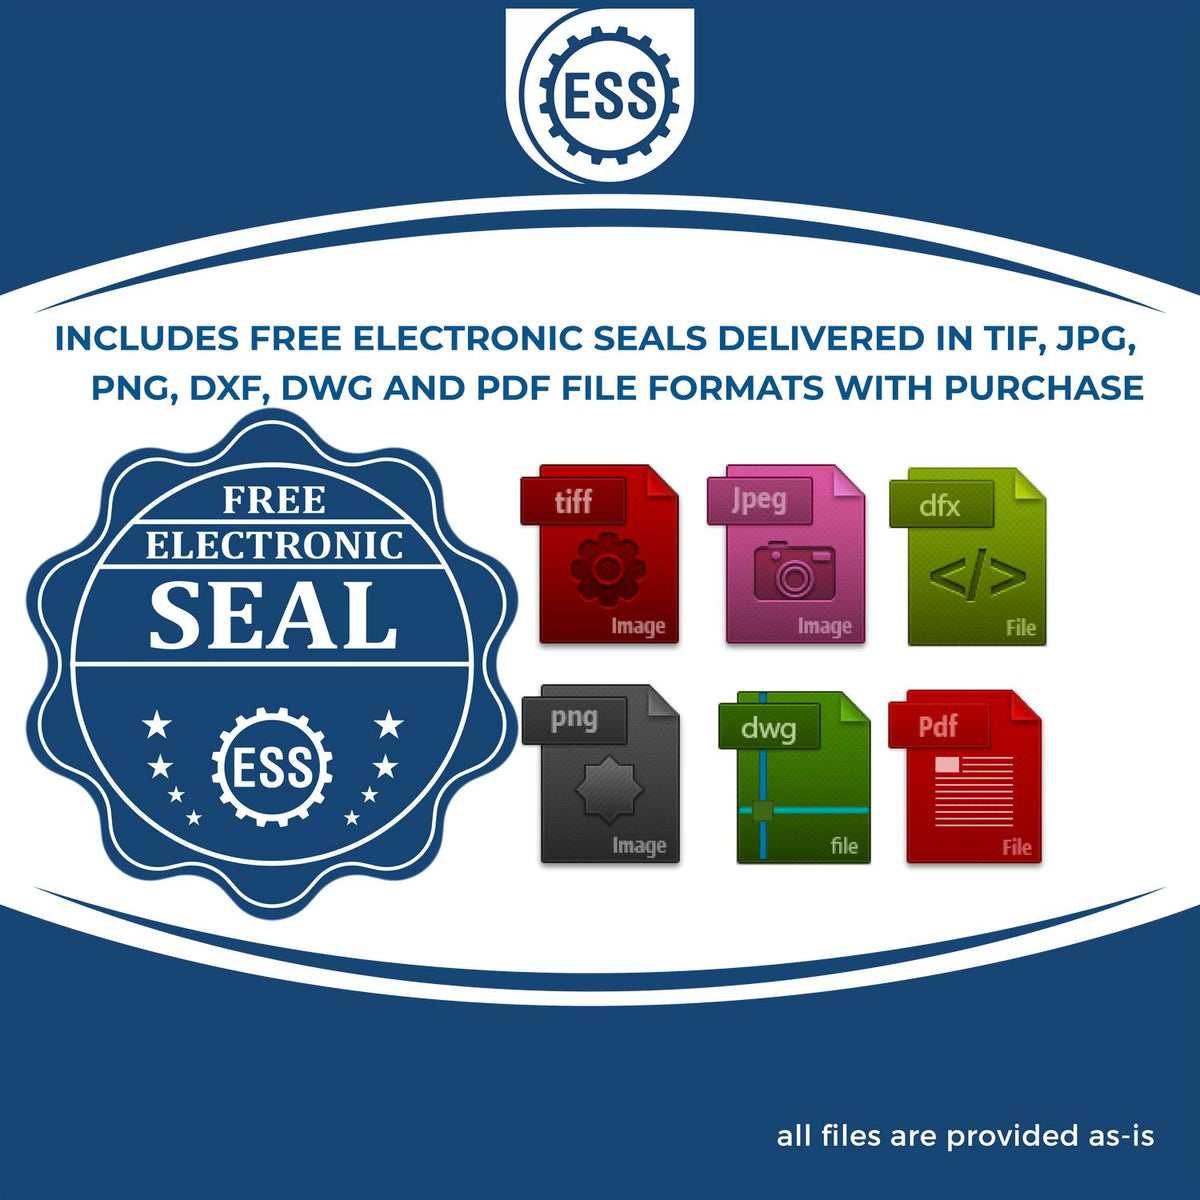 An infographic for the free electronic seal for the Gift North Carolina Geologist Seal illustrating the different file type icons such as DXF, DWG, TIF, JPG and PNG.